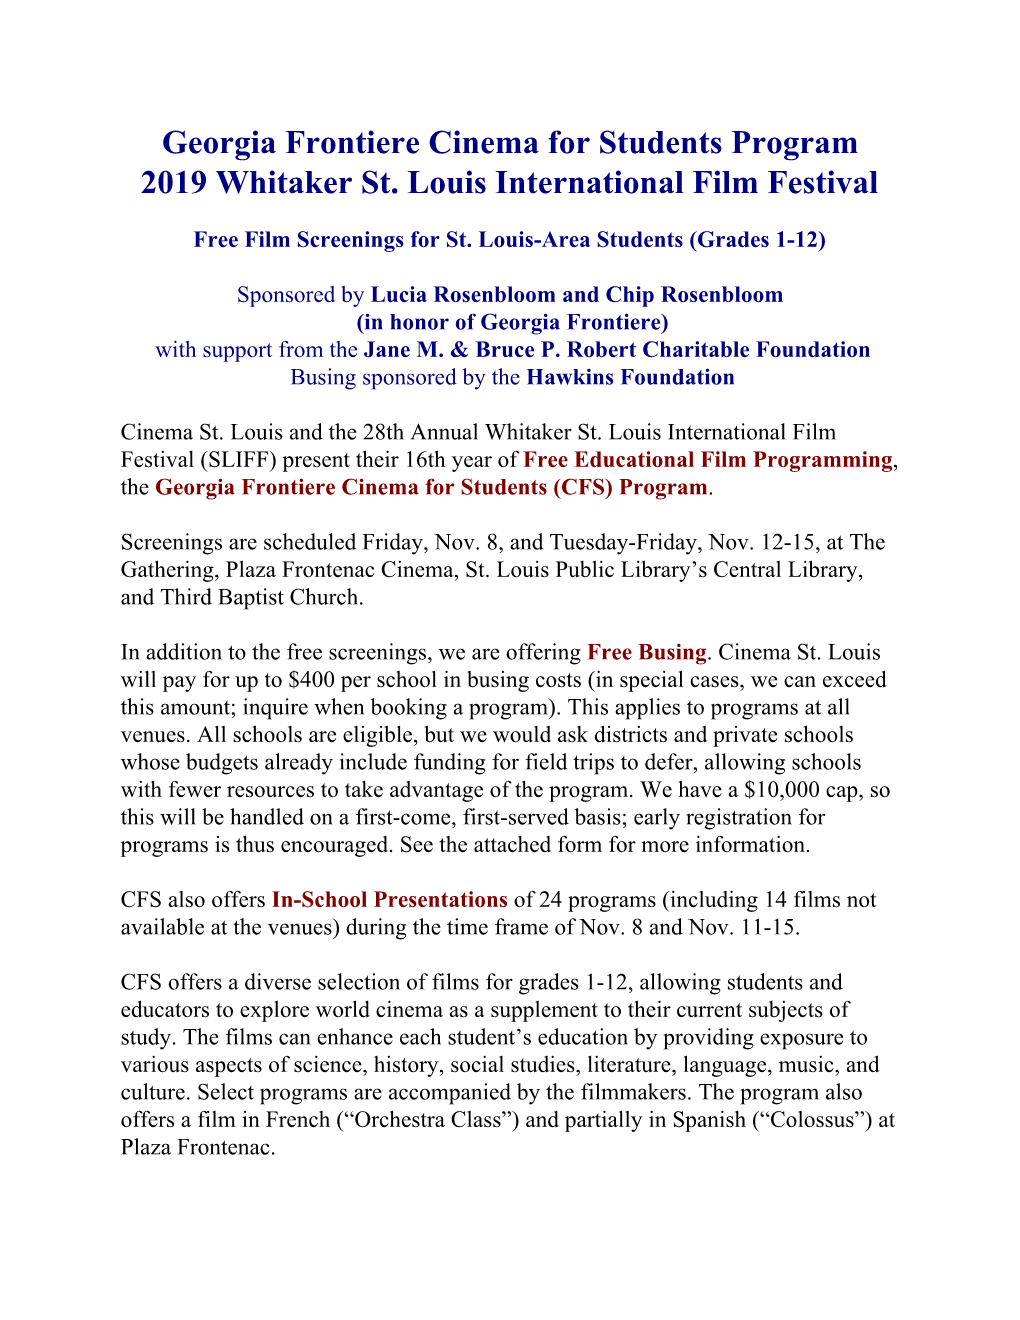 Georgia Frontiere Cinema for Students Program 2019 Whitaker St